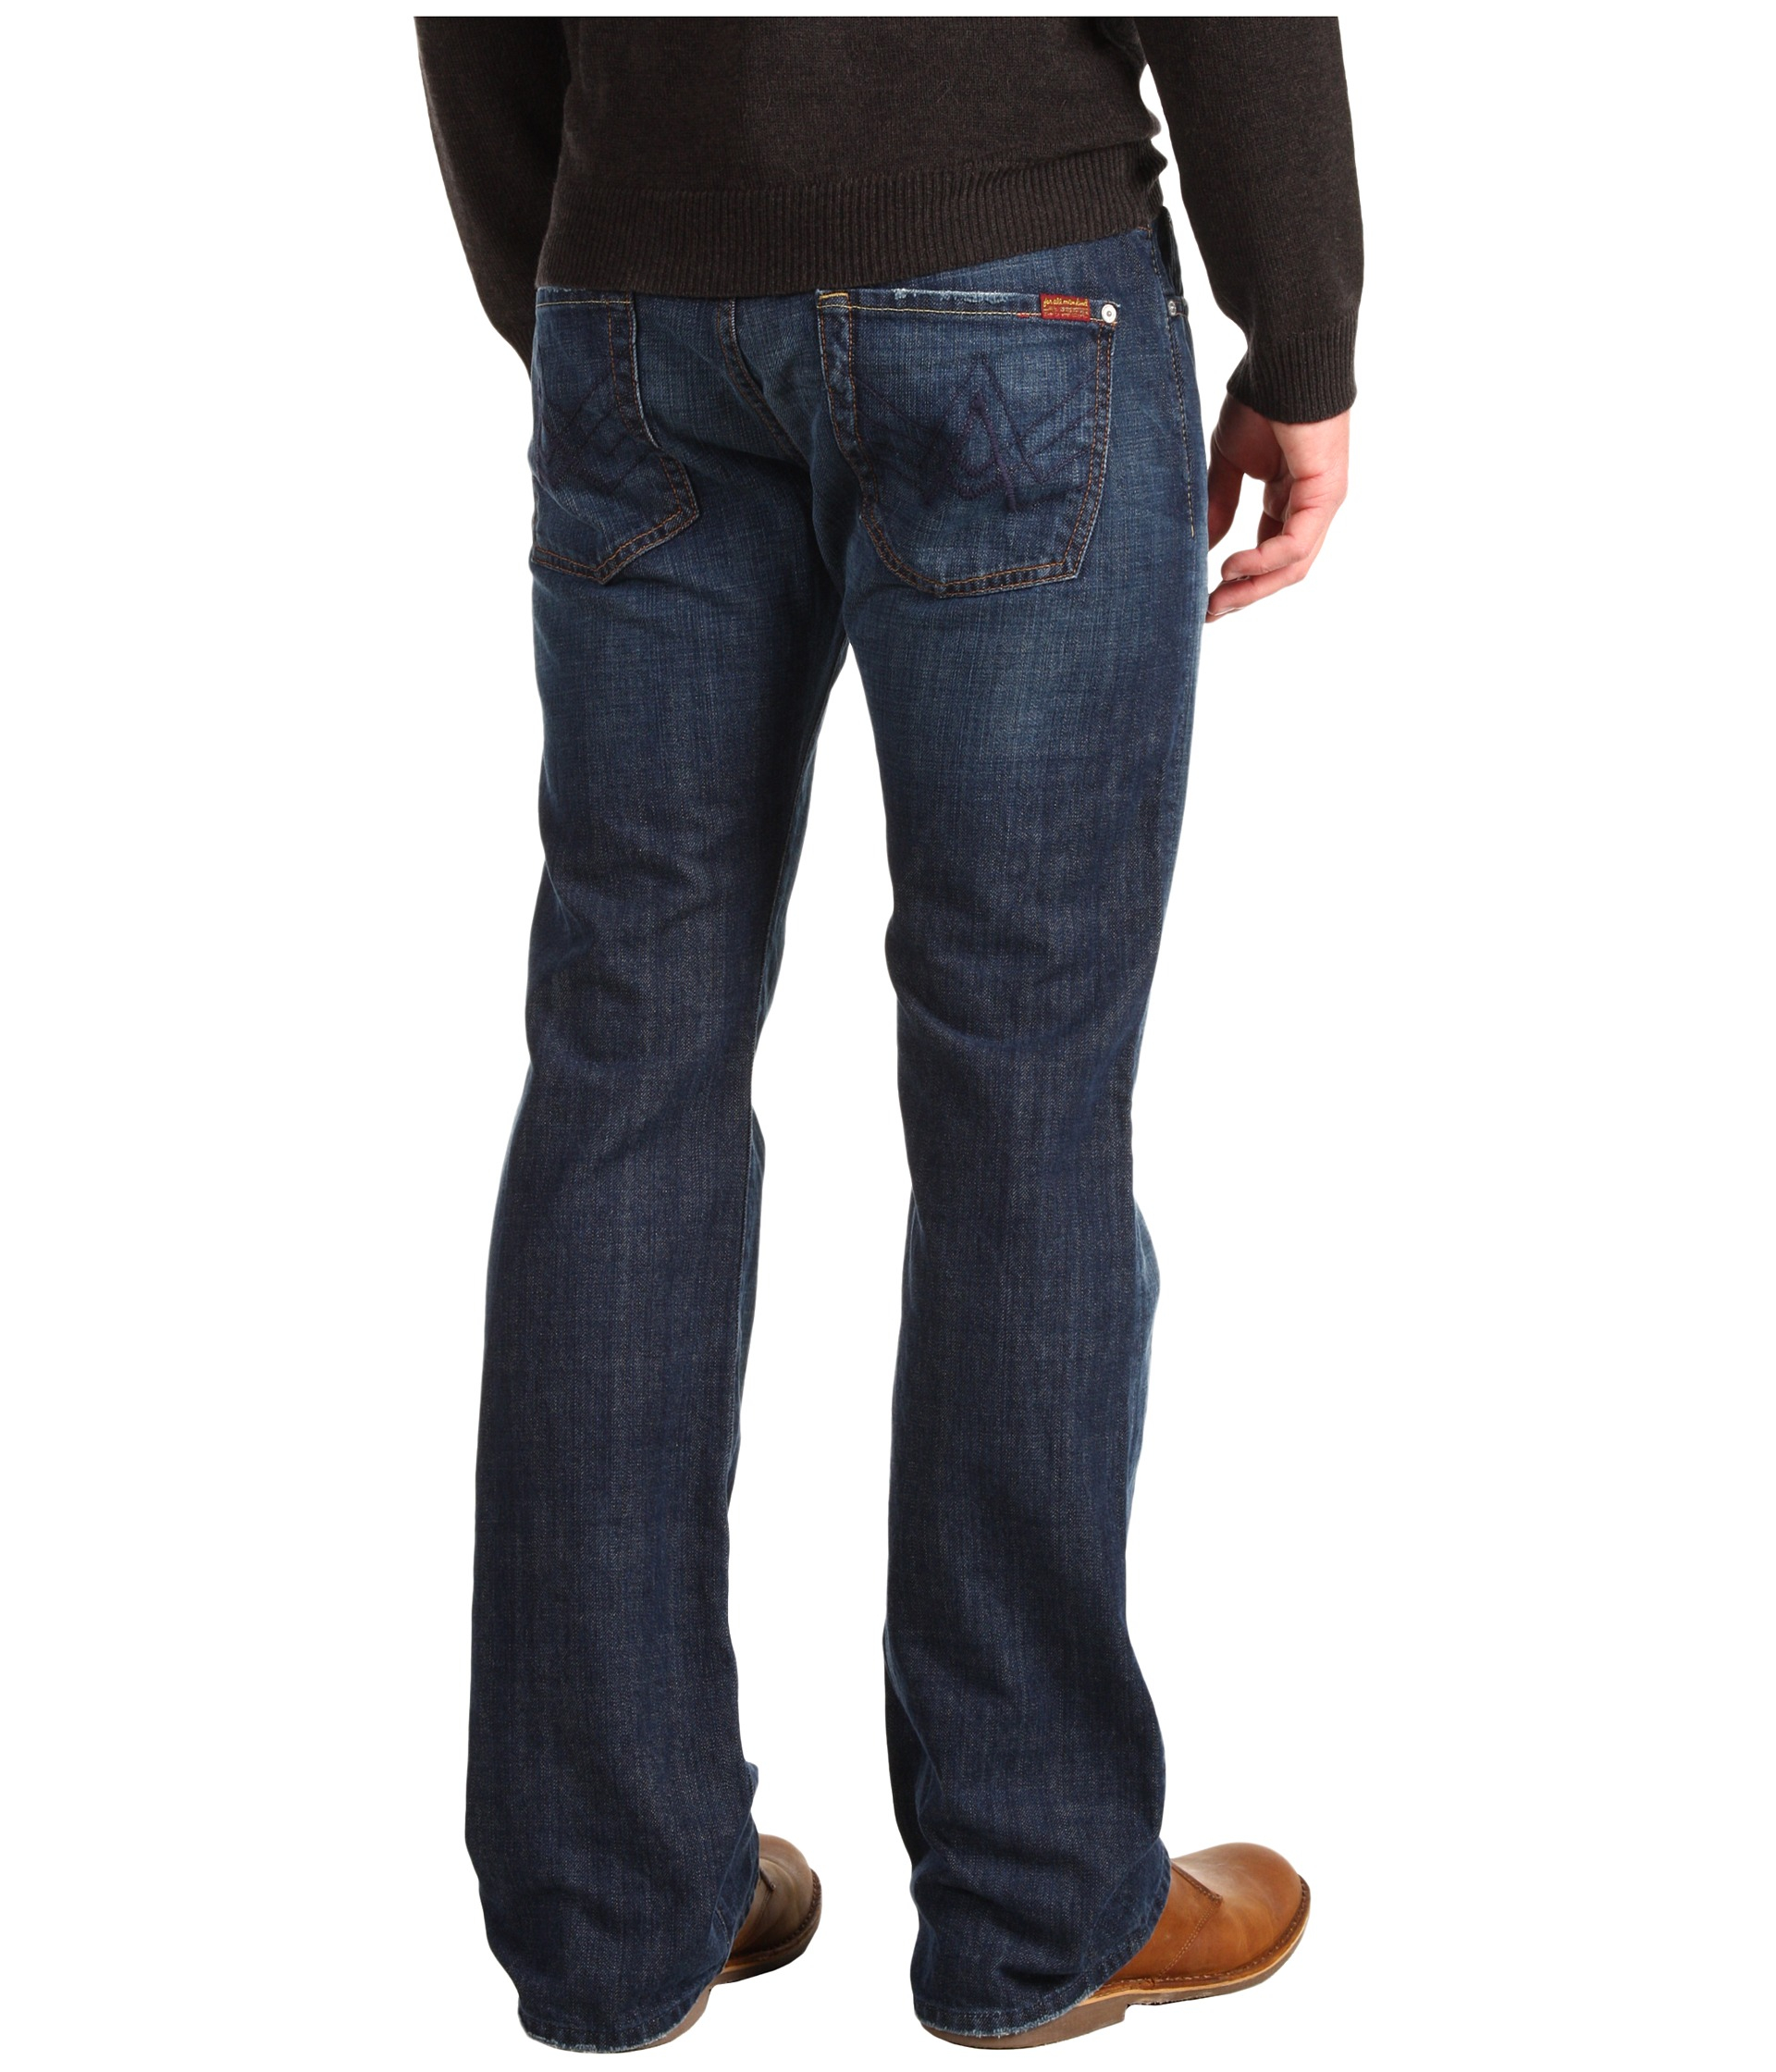 7 For All Mankind Bootcut Jeans Men's Greece, SAVE 37% - mpgc.net